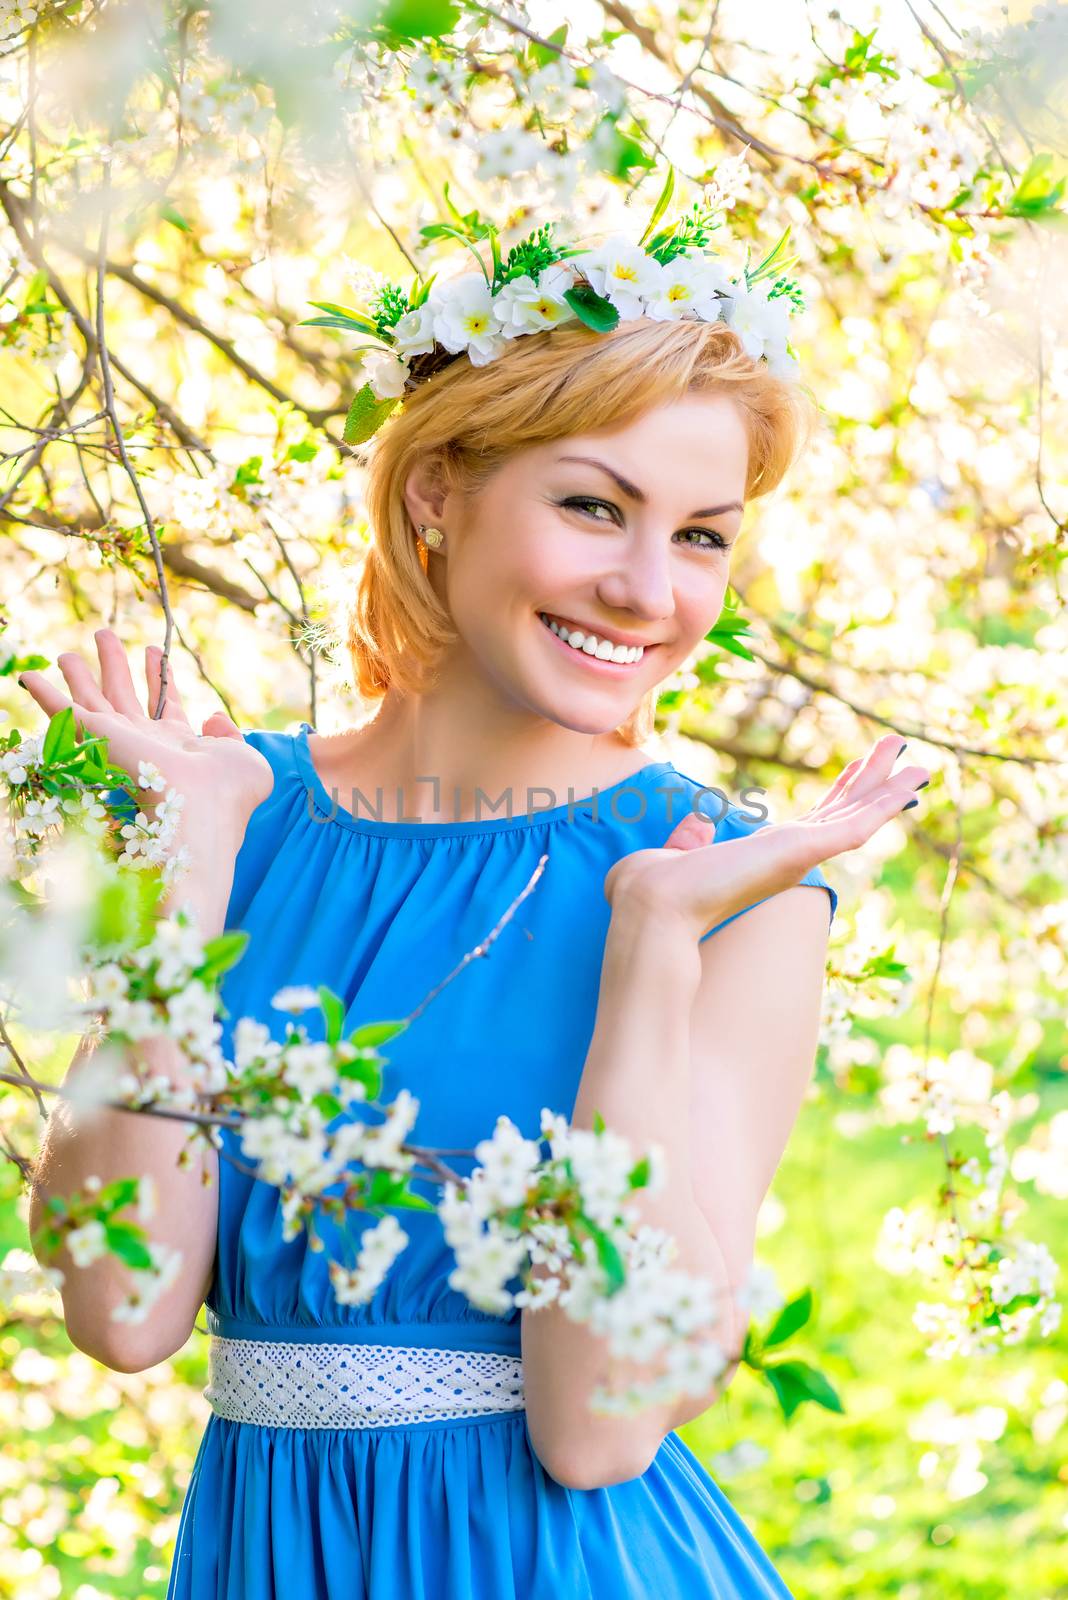 romantic girl with a wreath of flowers on her head near a flowering tree